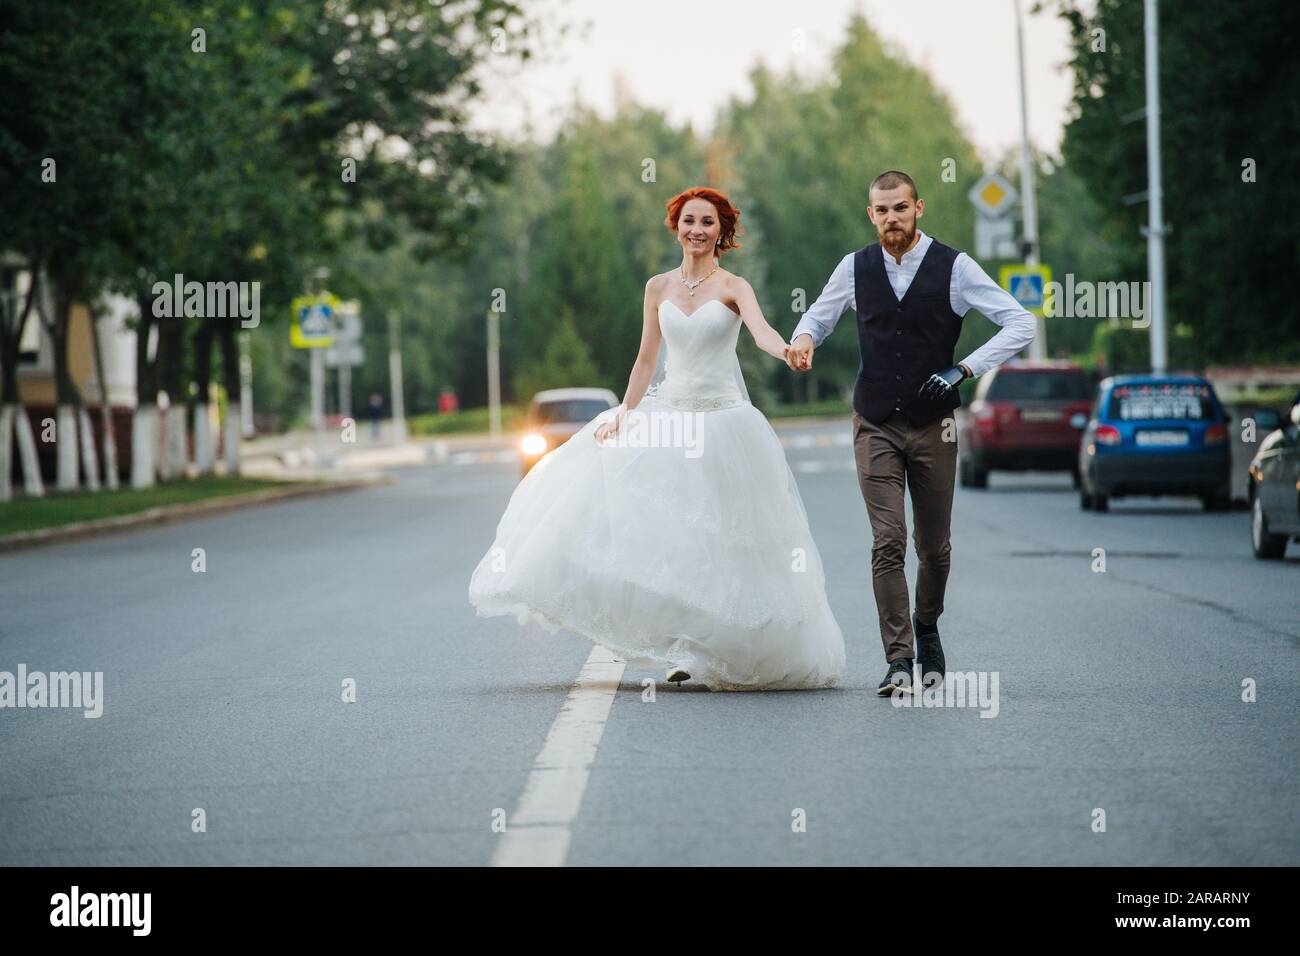 The bride and groom walking together in the middle of a street Stock Photo